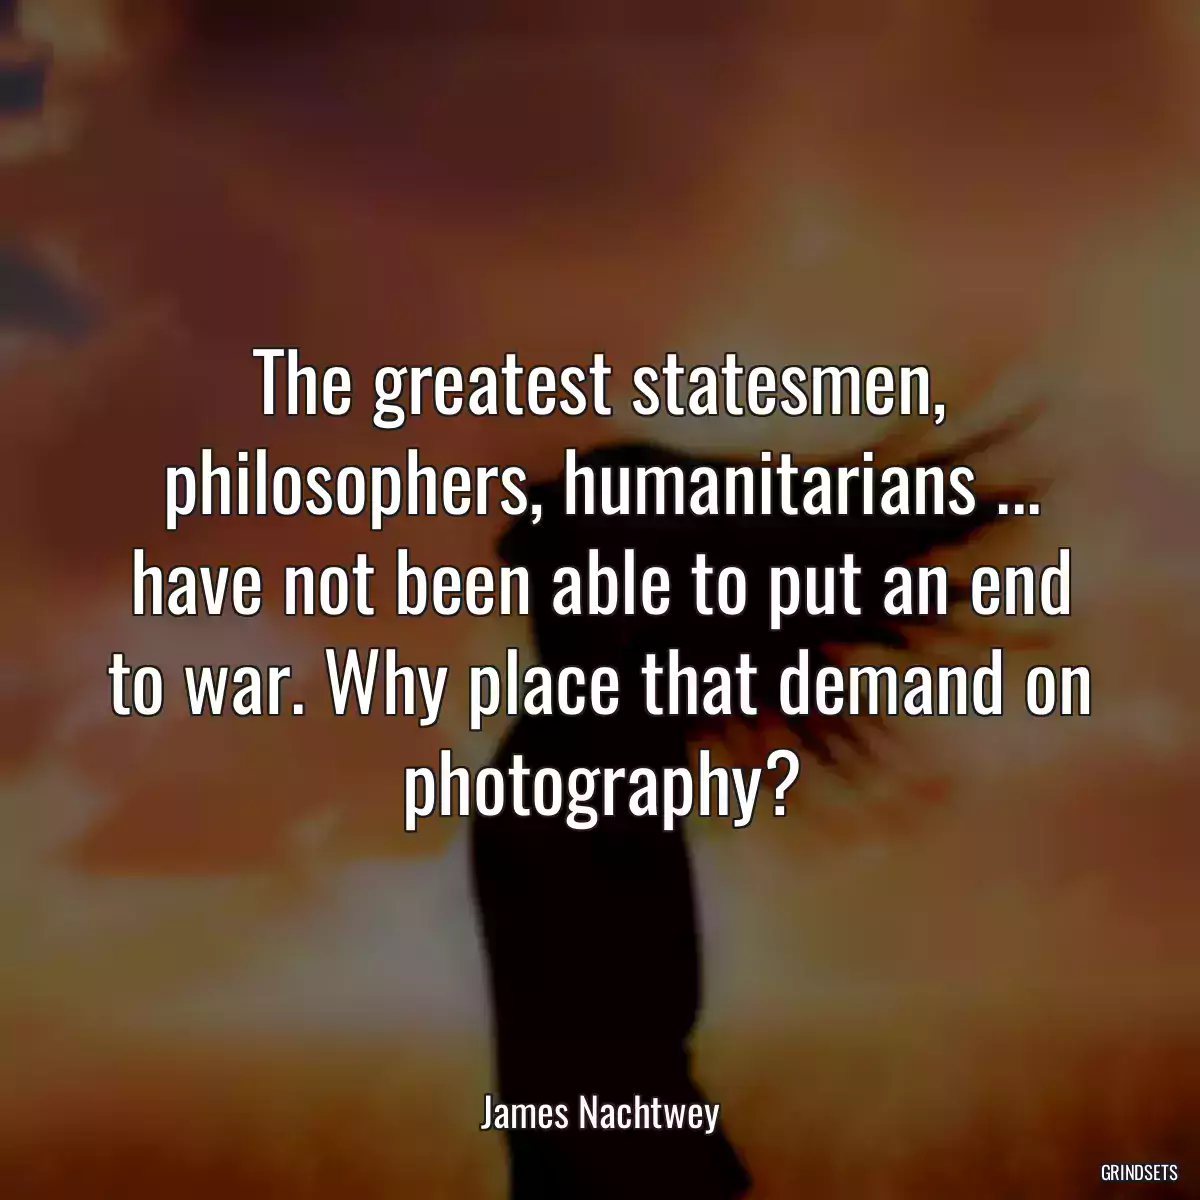 The greatest statesmen, philosophers, humanitarians ... have not been able to put an end to war. Why place that demand on photography?